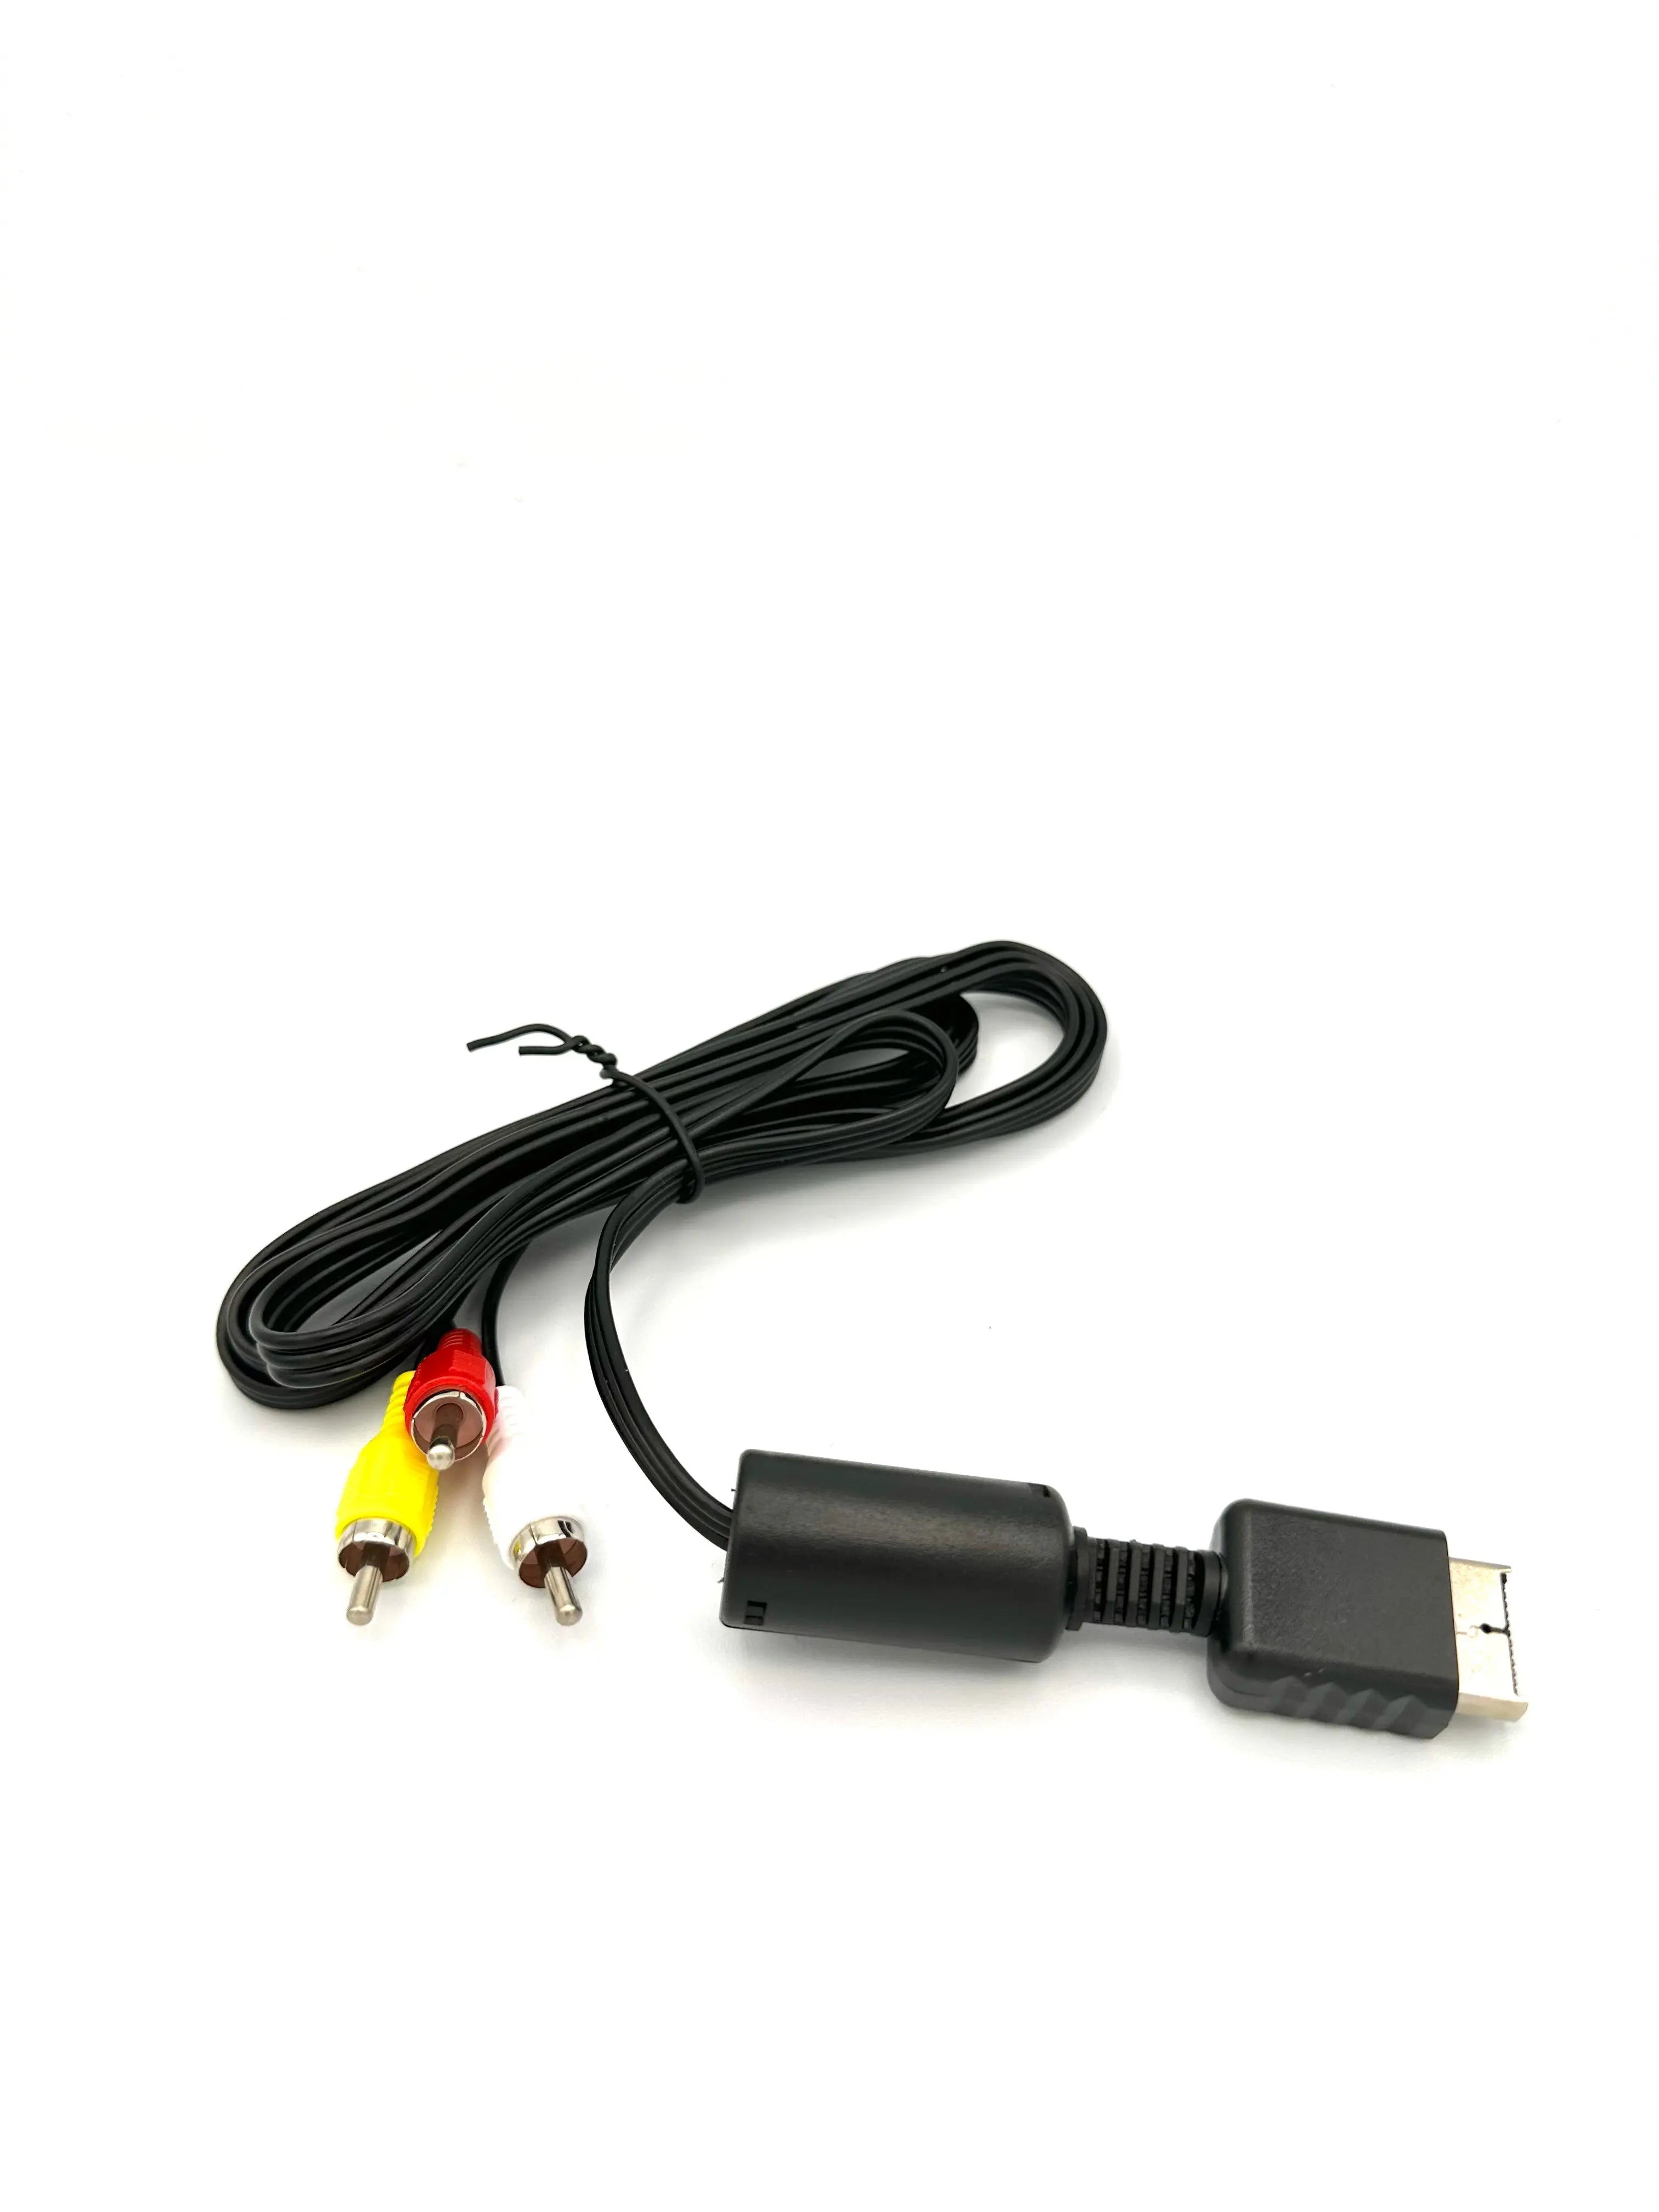 audio video cable for playstation 3